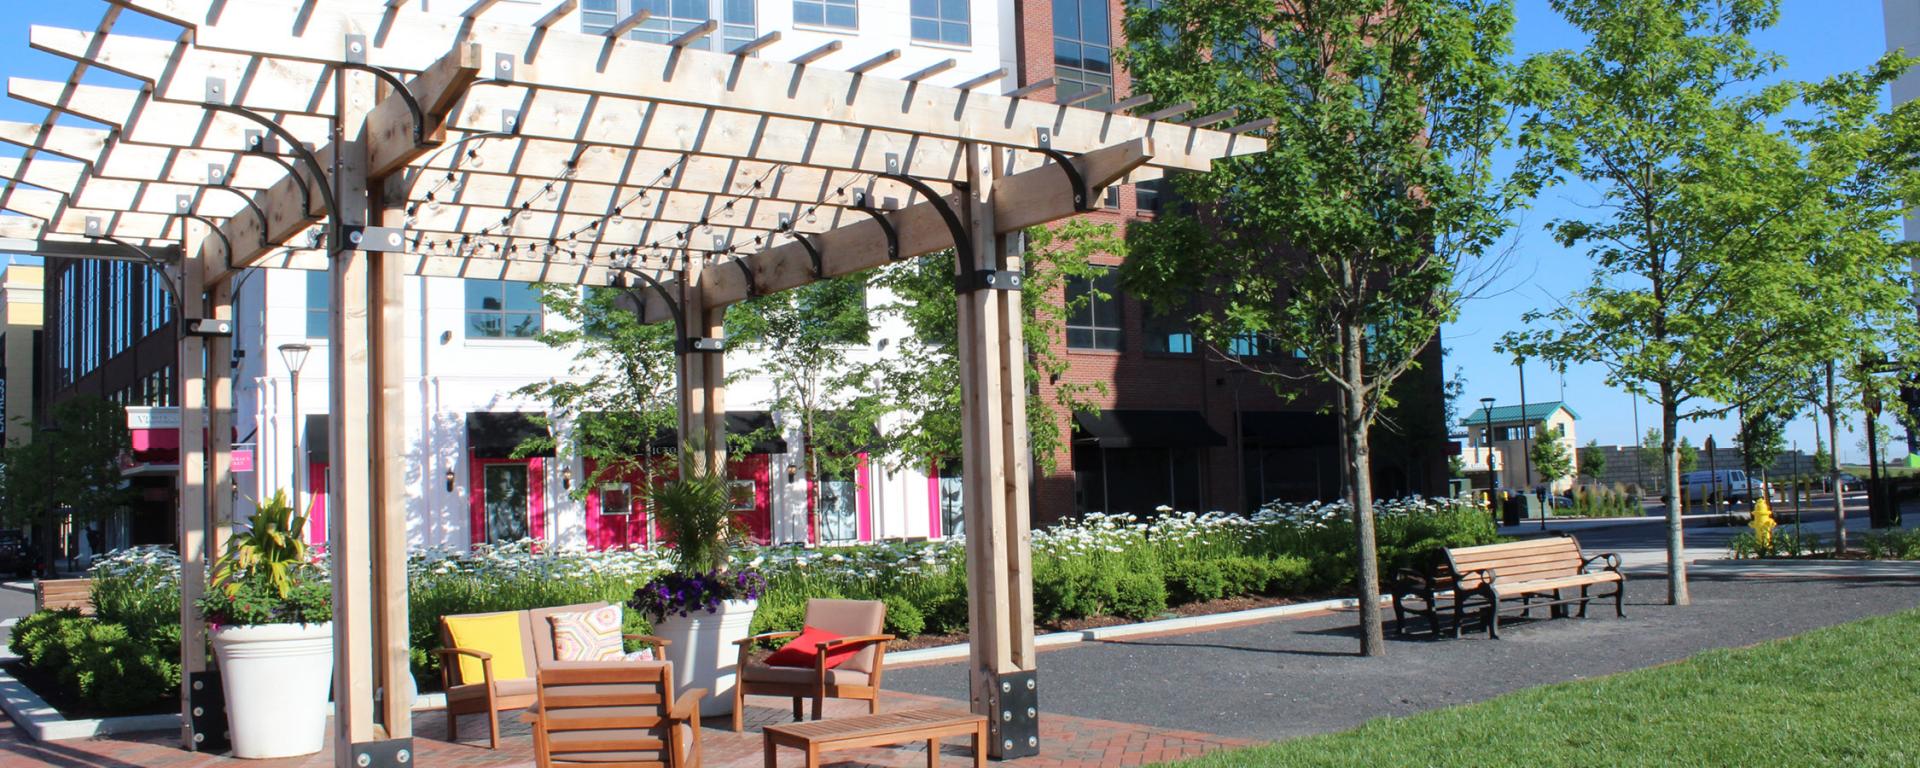 pergola and bench in park area